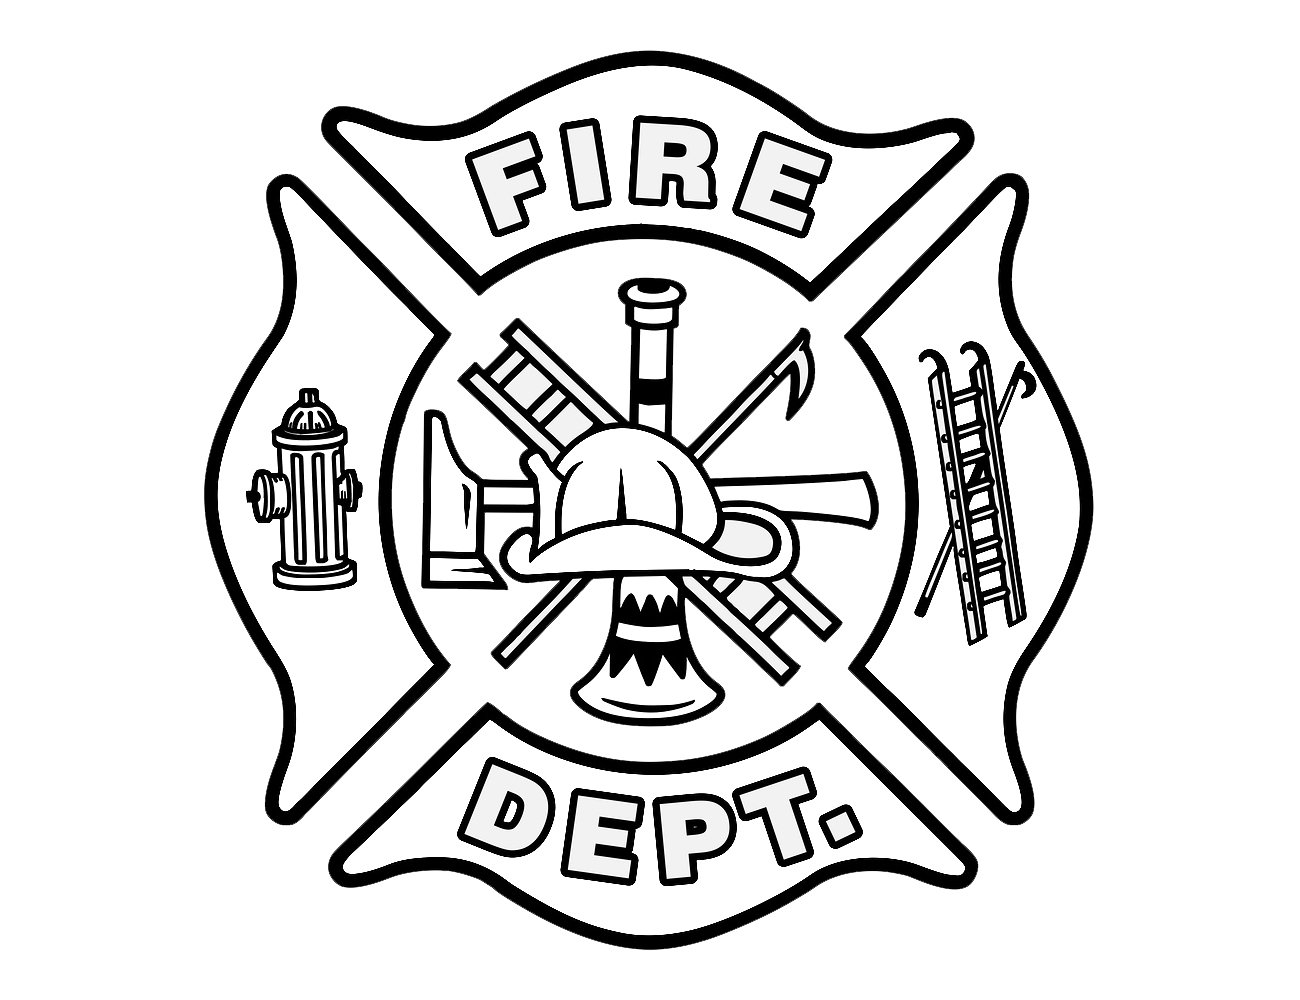 firefighter symbol meaning